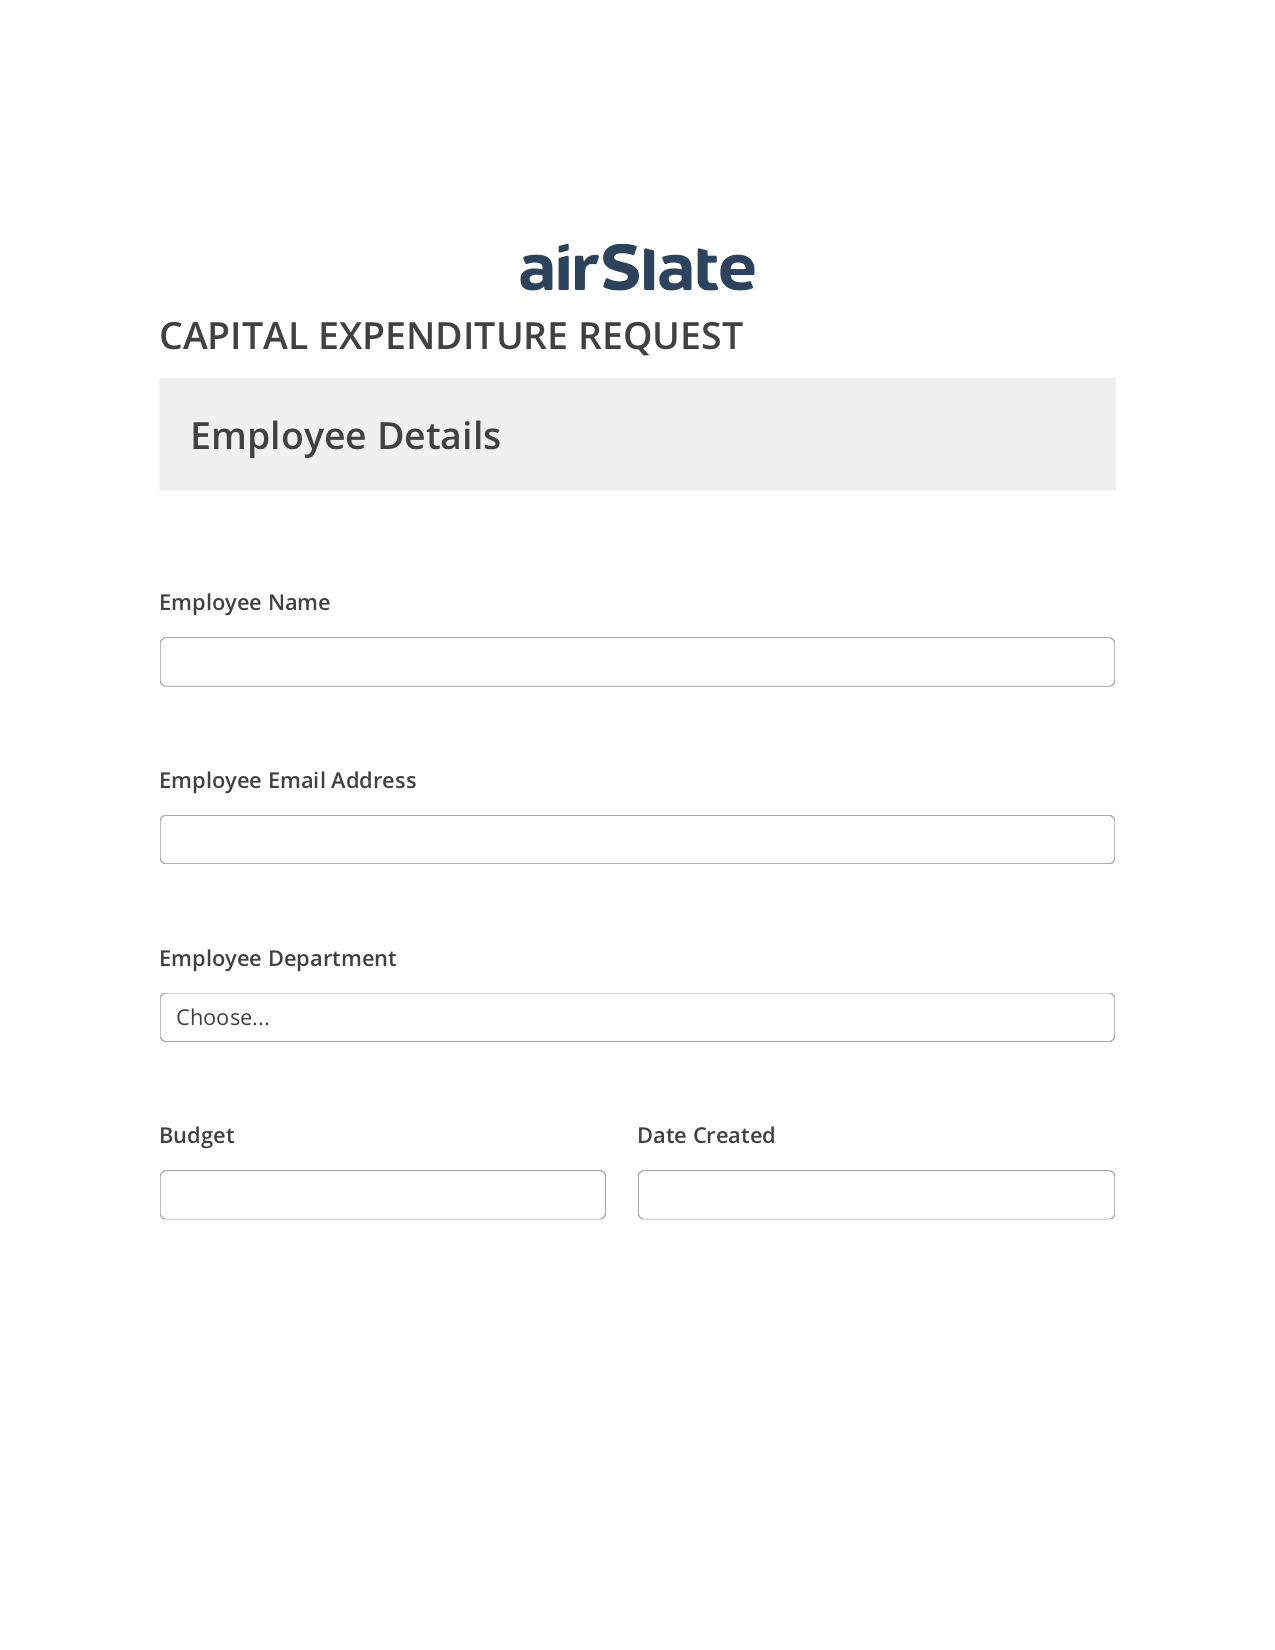 Multirole Capital Expenditure Request Approval Workflow Pre-fill Dropdown from Airtable, Lock the Slate Bot, Export to NetSuite